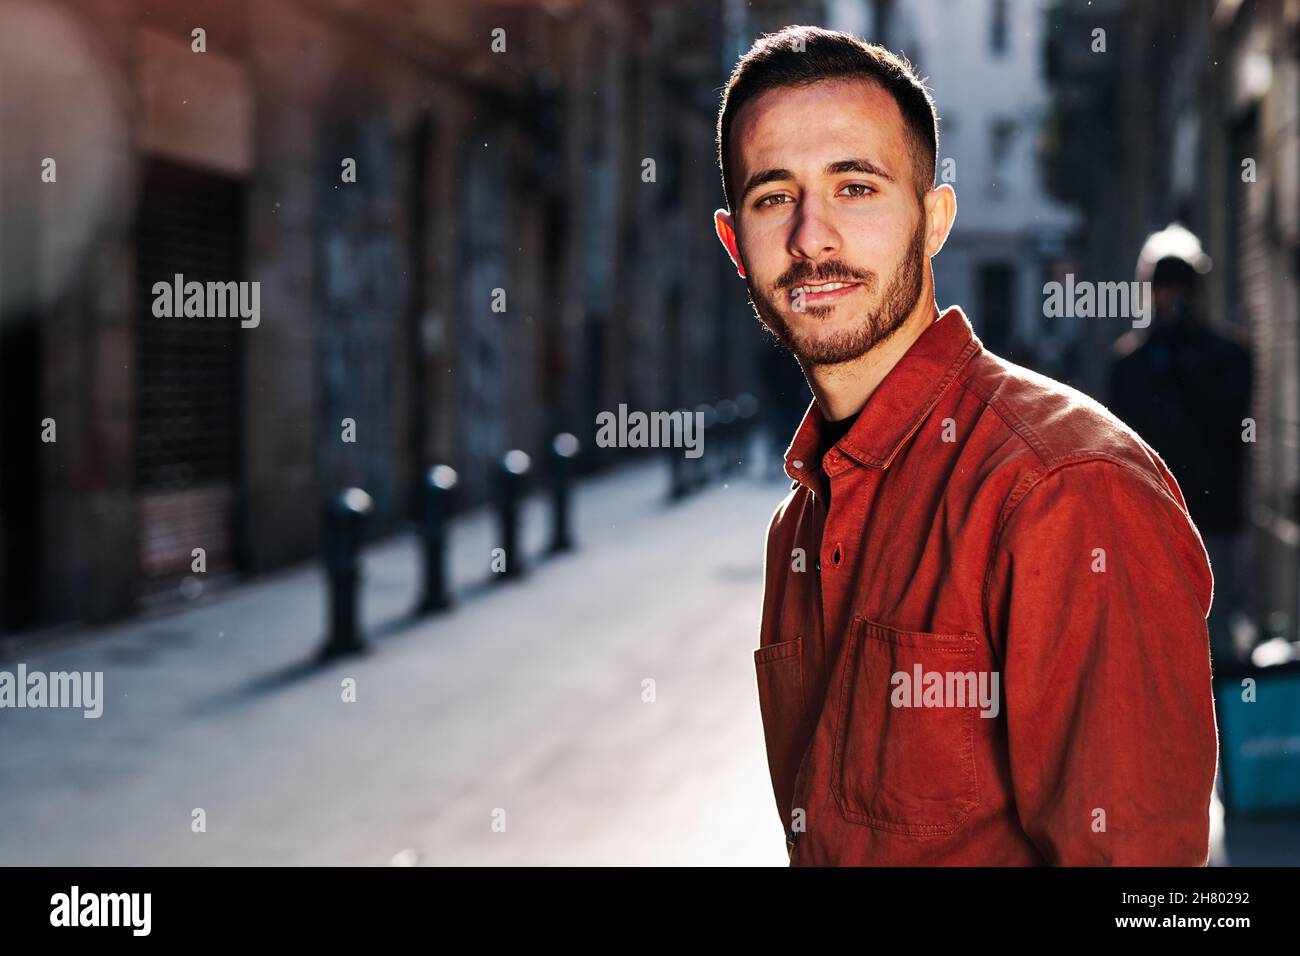 Man standing outdoors on the street. Stock Photo